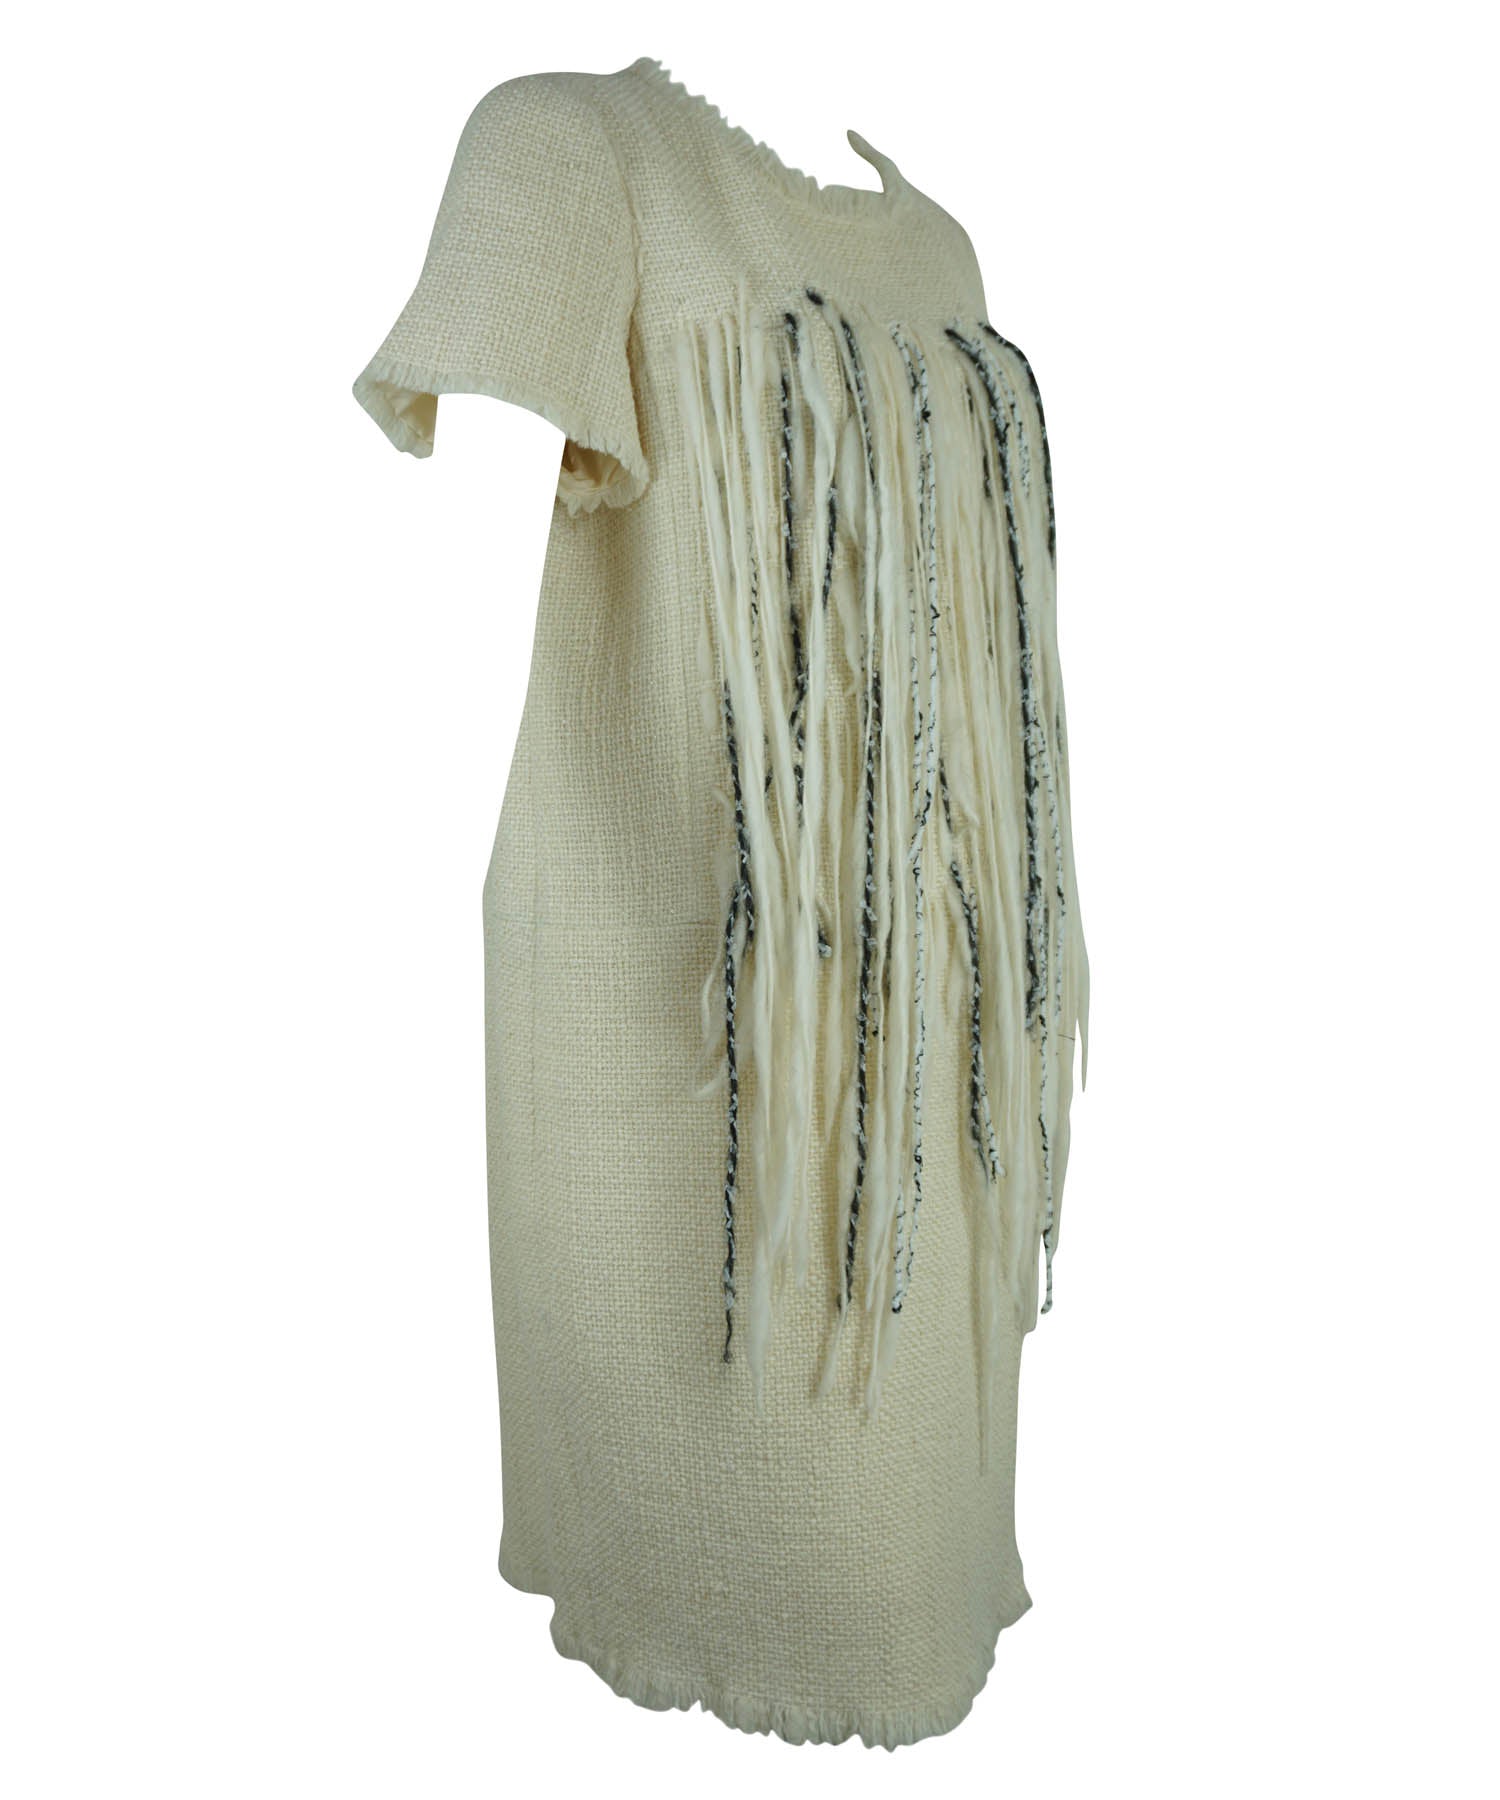 Chanel Tweed Dress with Pearl and Fringe Detail Sz 42